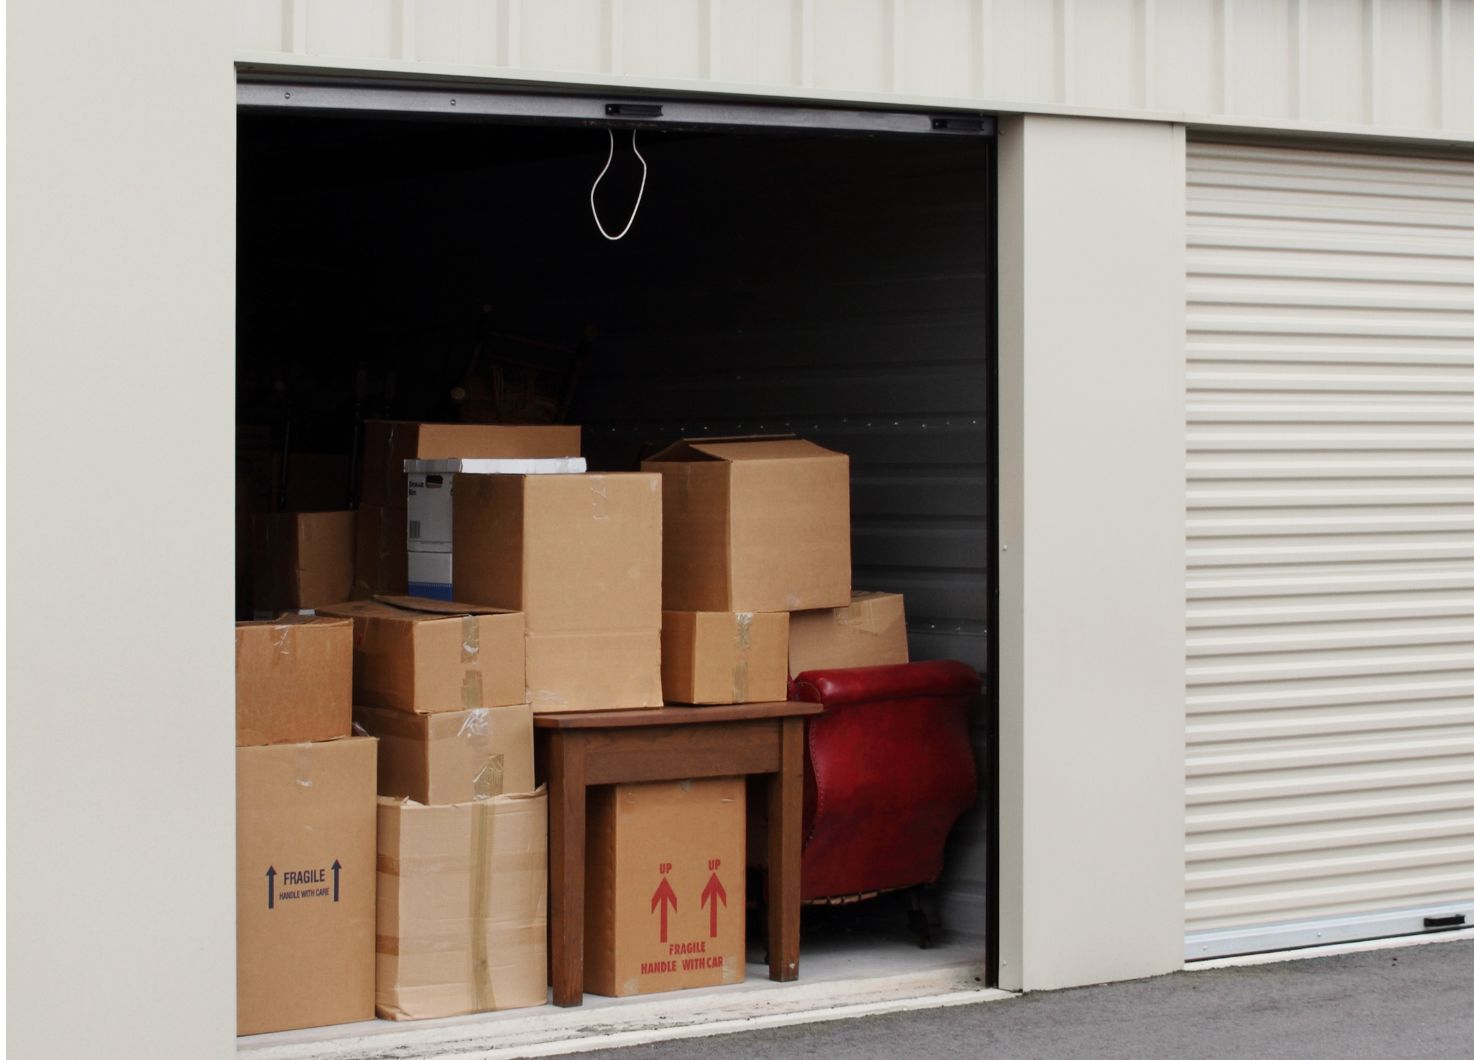 Best Self Storage Santa Clara: You’re Solution for Secure and Budget-Friendly Storage